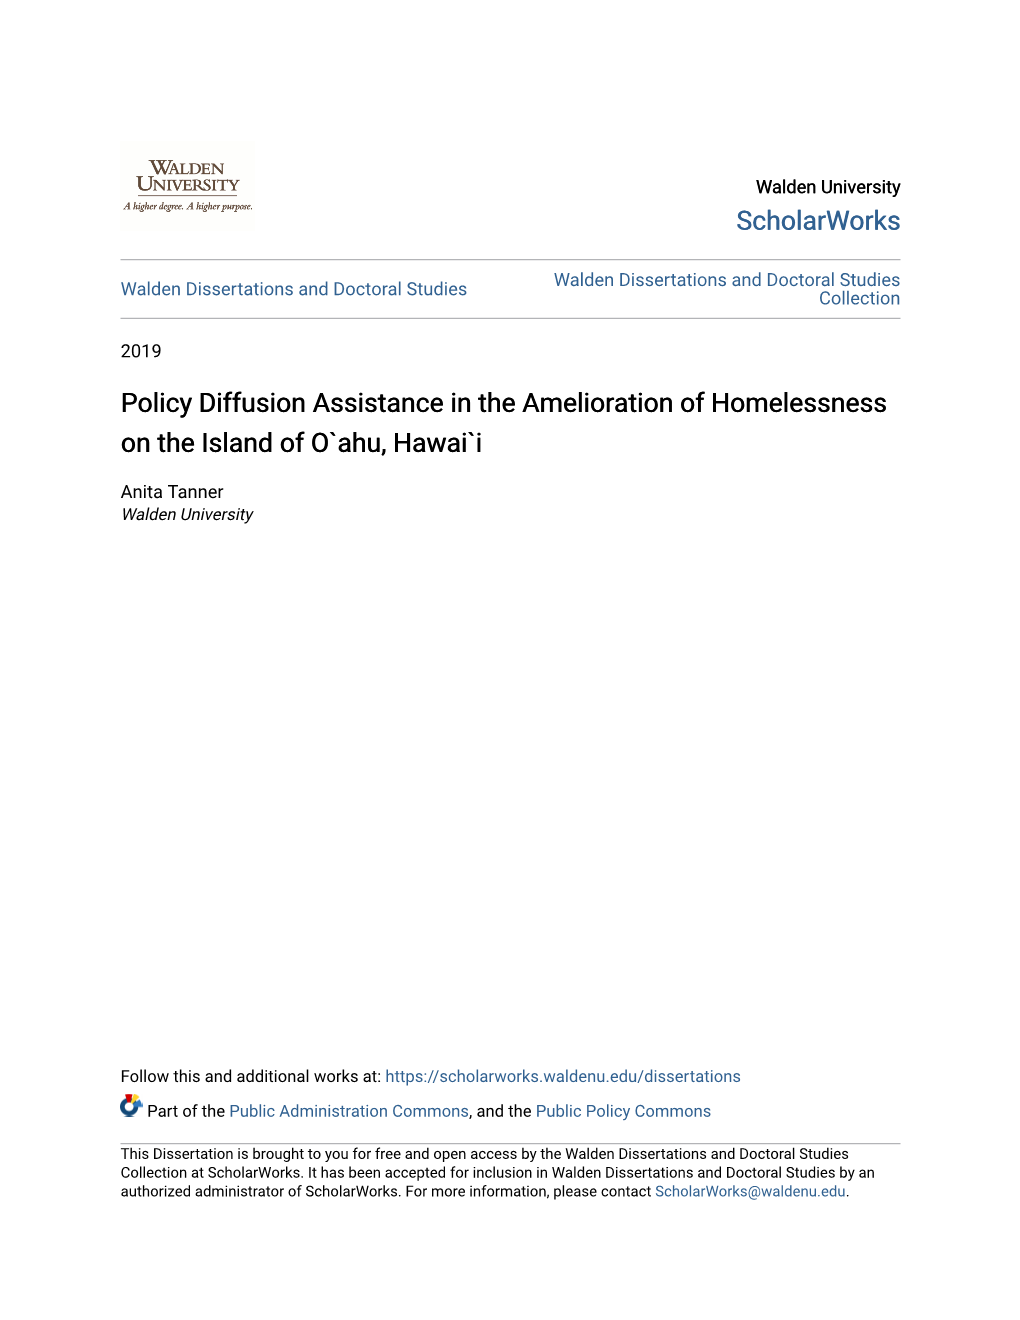 Policy Diffusion Assistance in the Amelioration of Homelessness on the Island of O`Ahu, Hawai`I